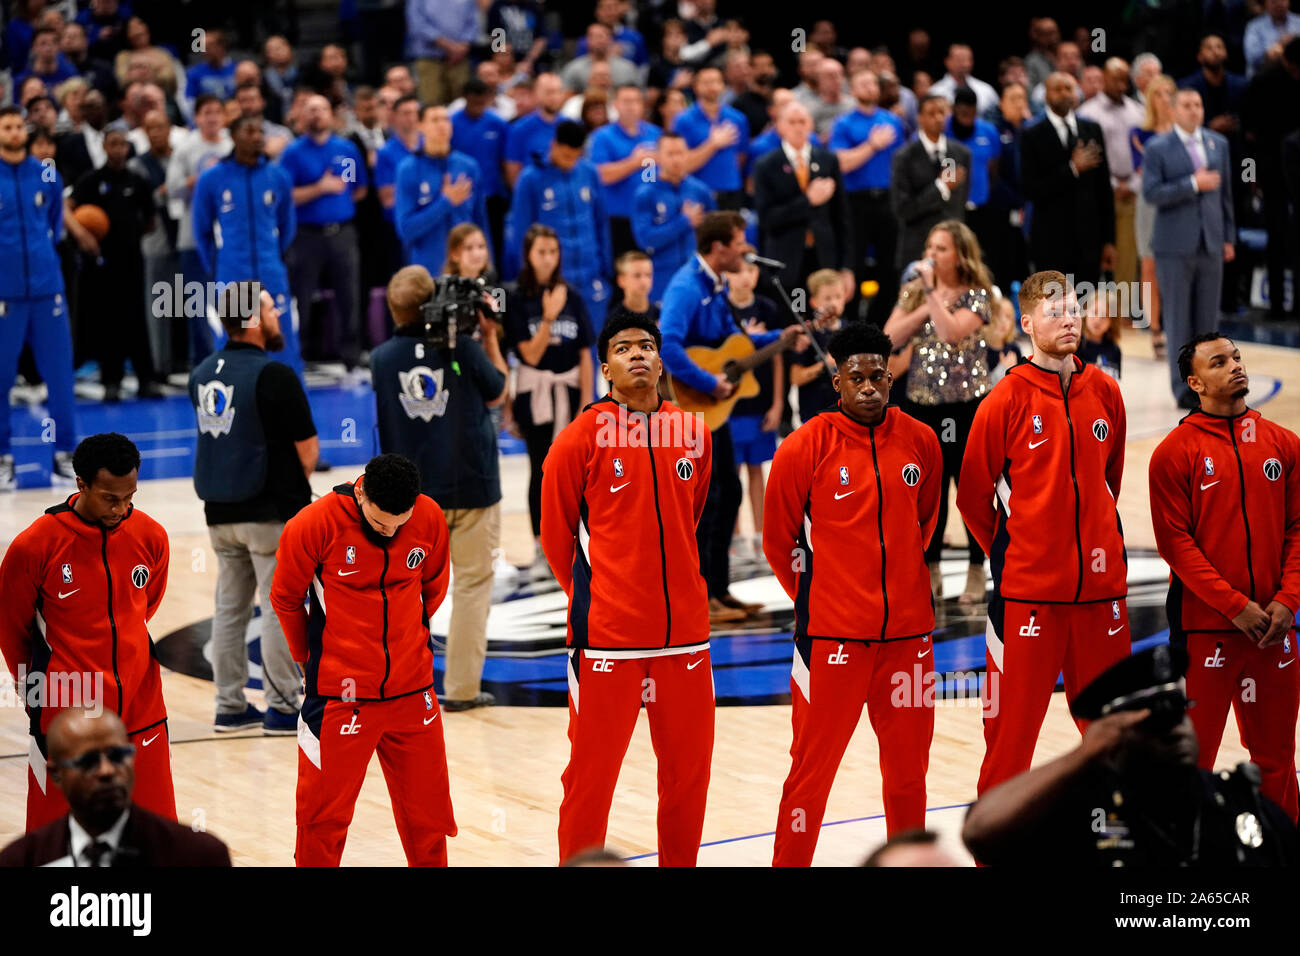 Washington Wizards' Rui Hachimura (3L) before the NBA basketball game between Washington Wizards 100-108 Dallas Mavericks at American Airlines Center in Dallas, Texas, United States, October 23, 2019. Credit: AFLO/Alamy Live News Stock Photo